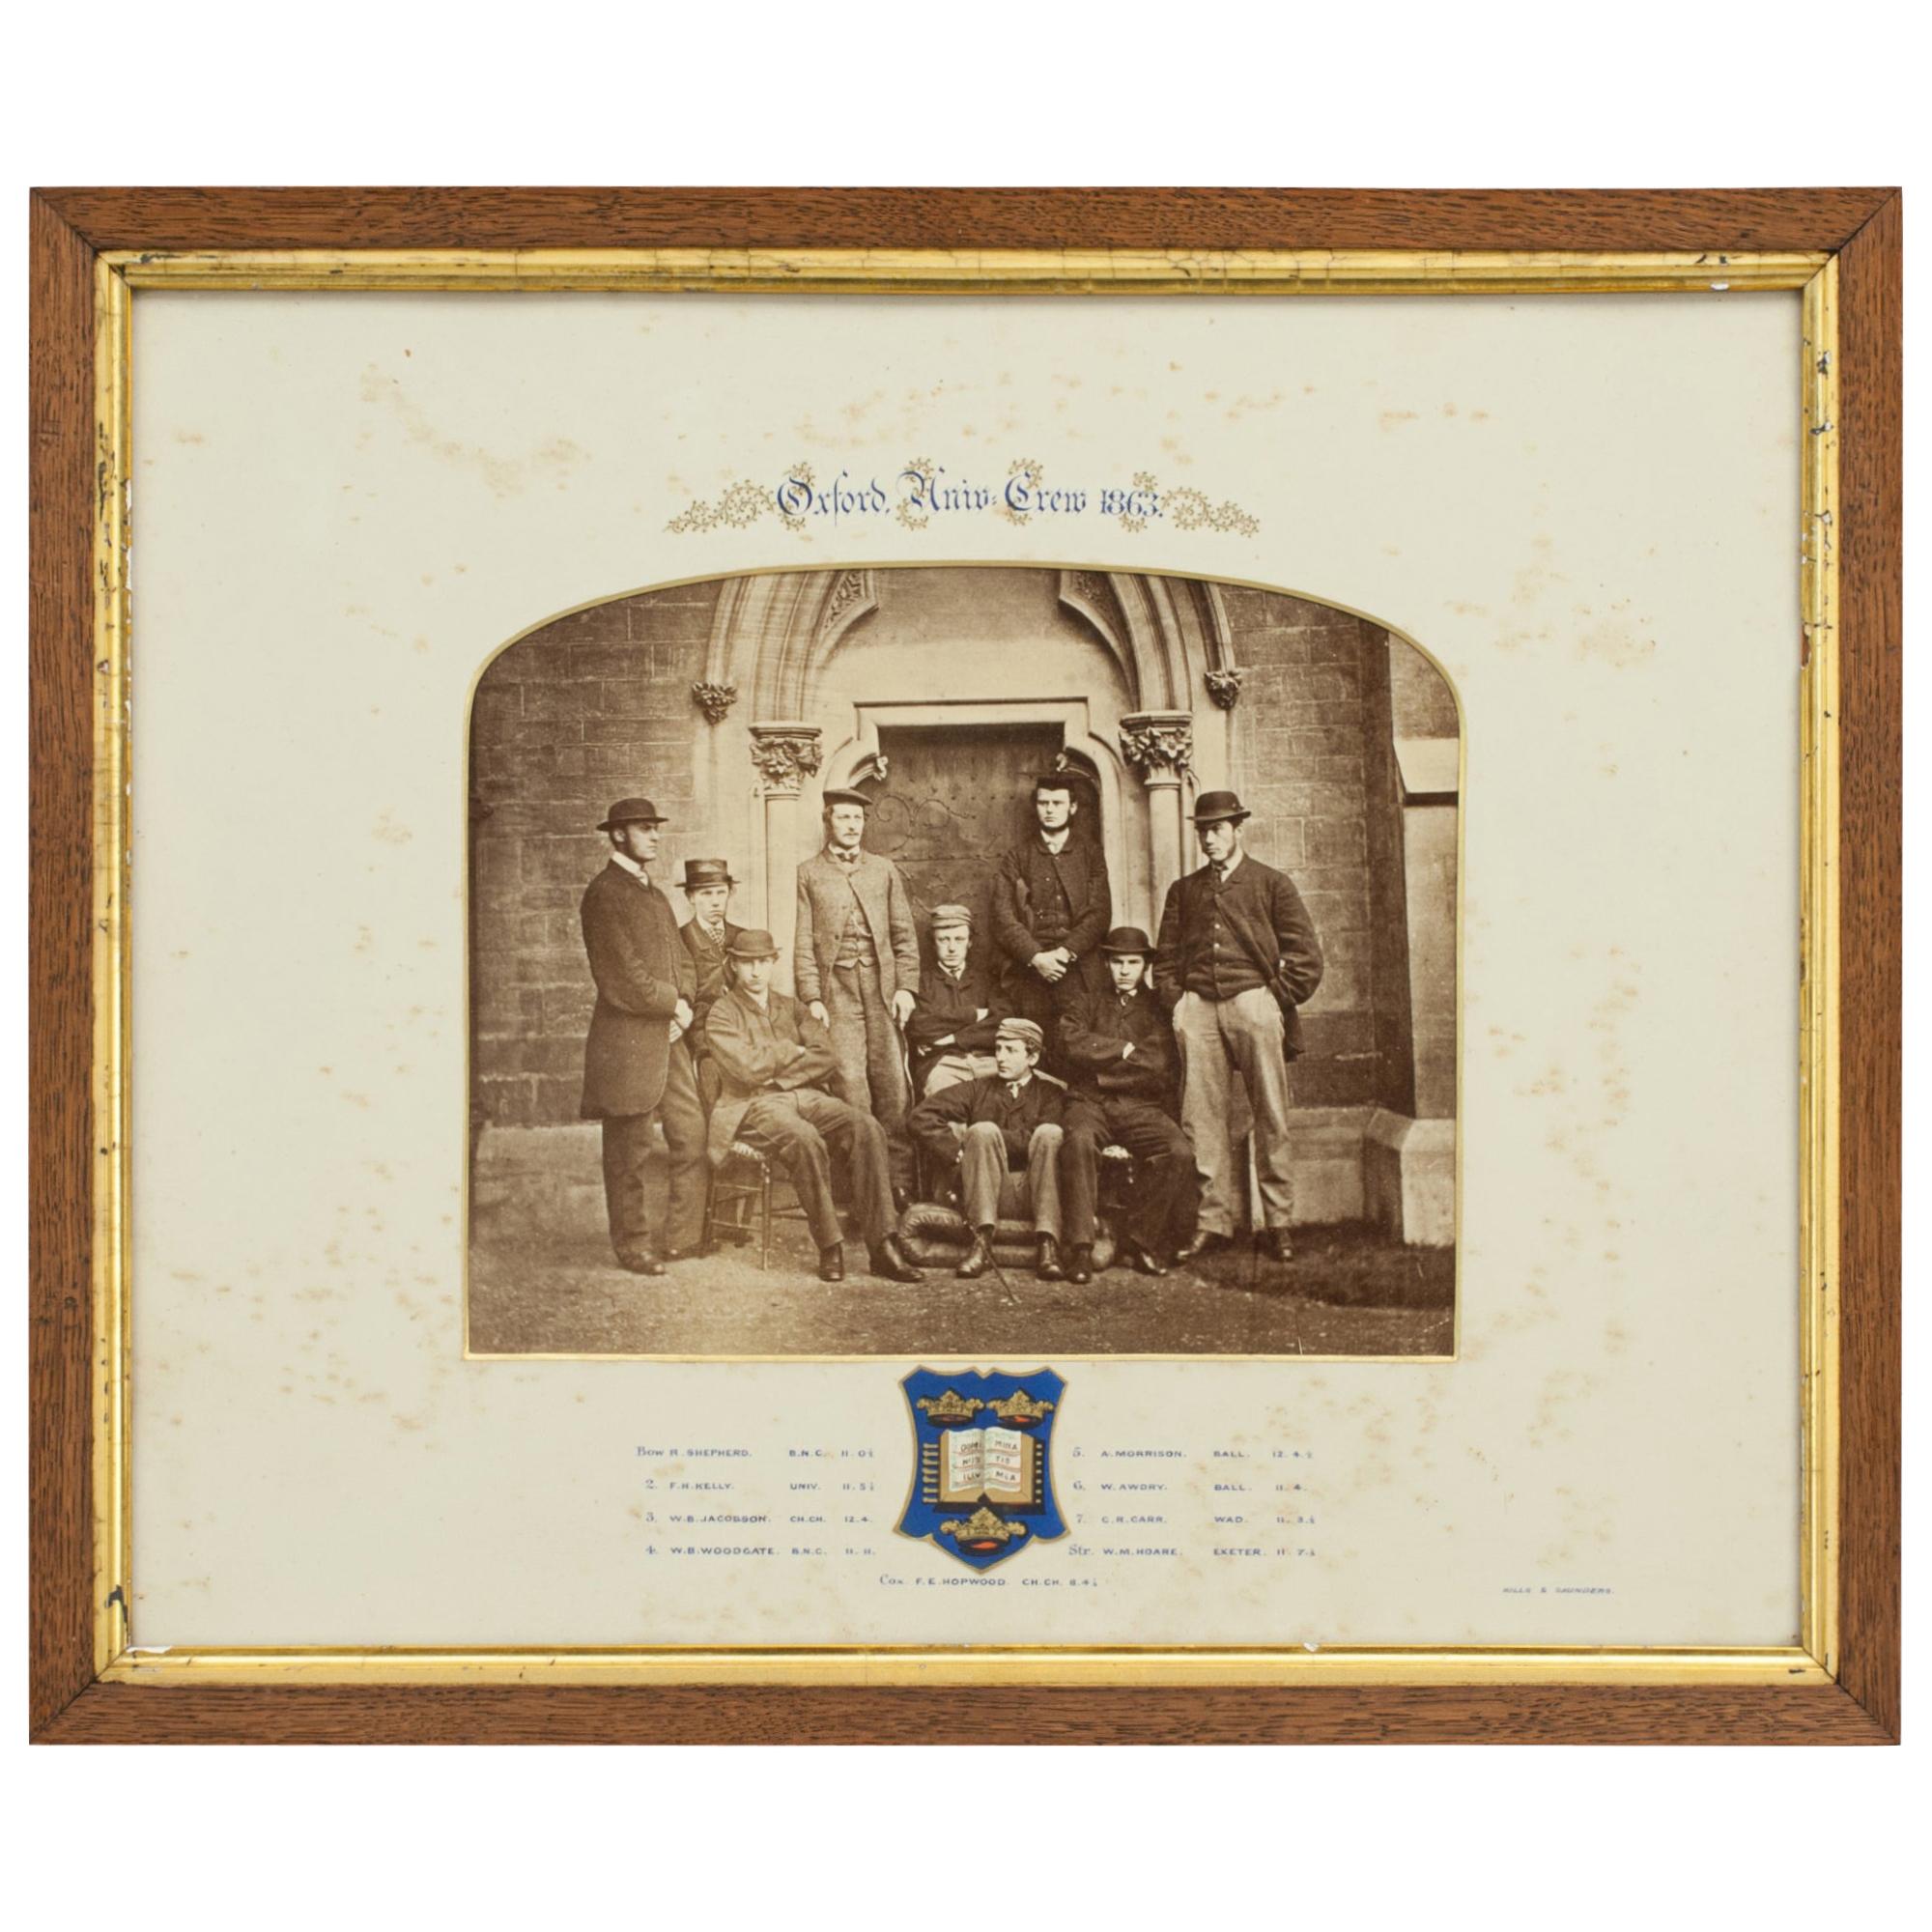 1863 Oxford University Boat Race Team Photograph, Early Historic Photograph